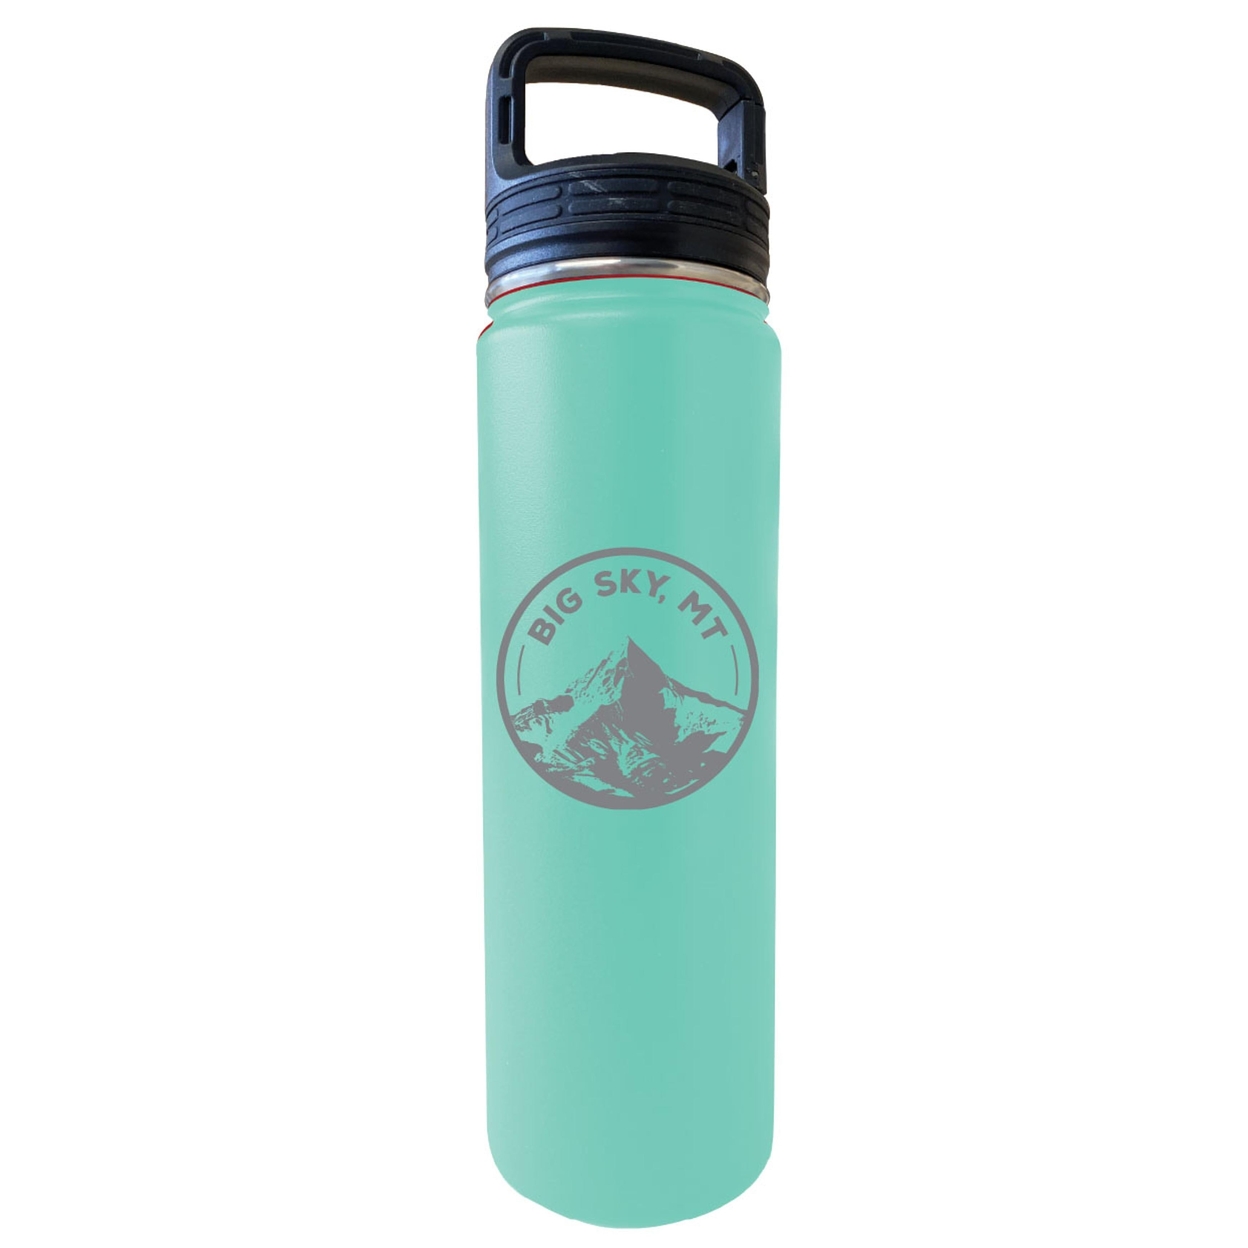 Big Sky Montana Souvenir 32 Oz Engraved Insulated Stainless Steel Tumbler - Seafoam,,4-Pack